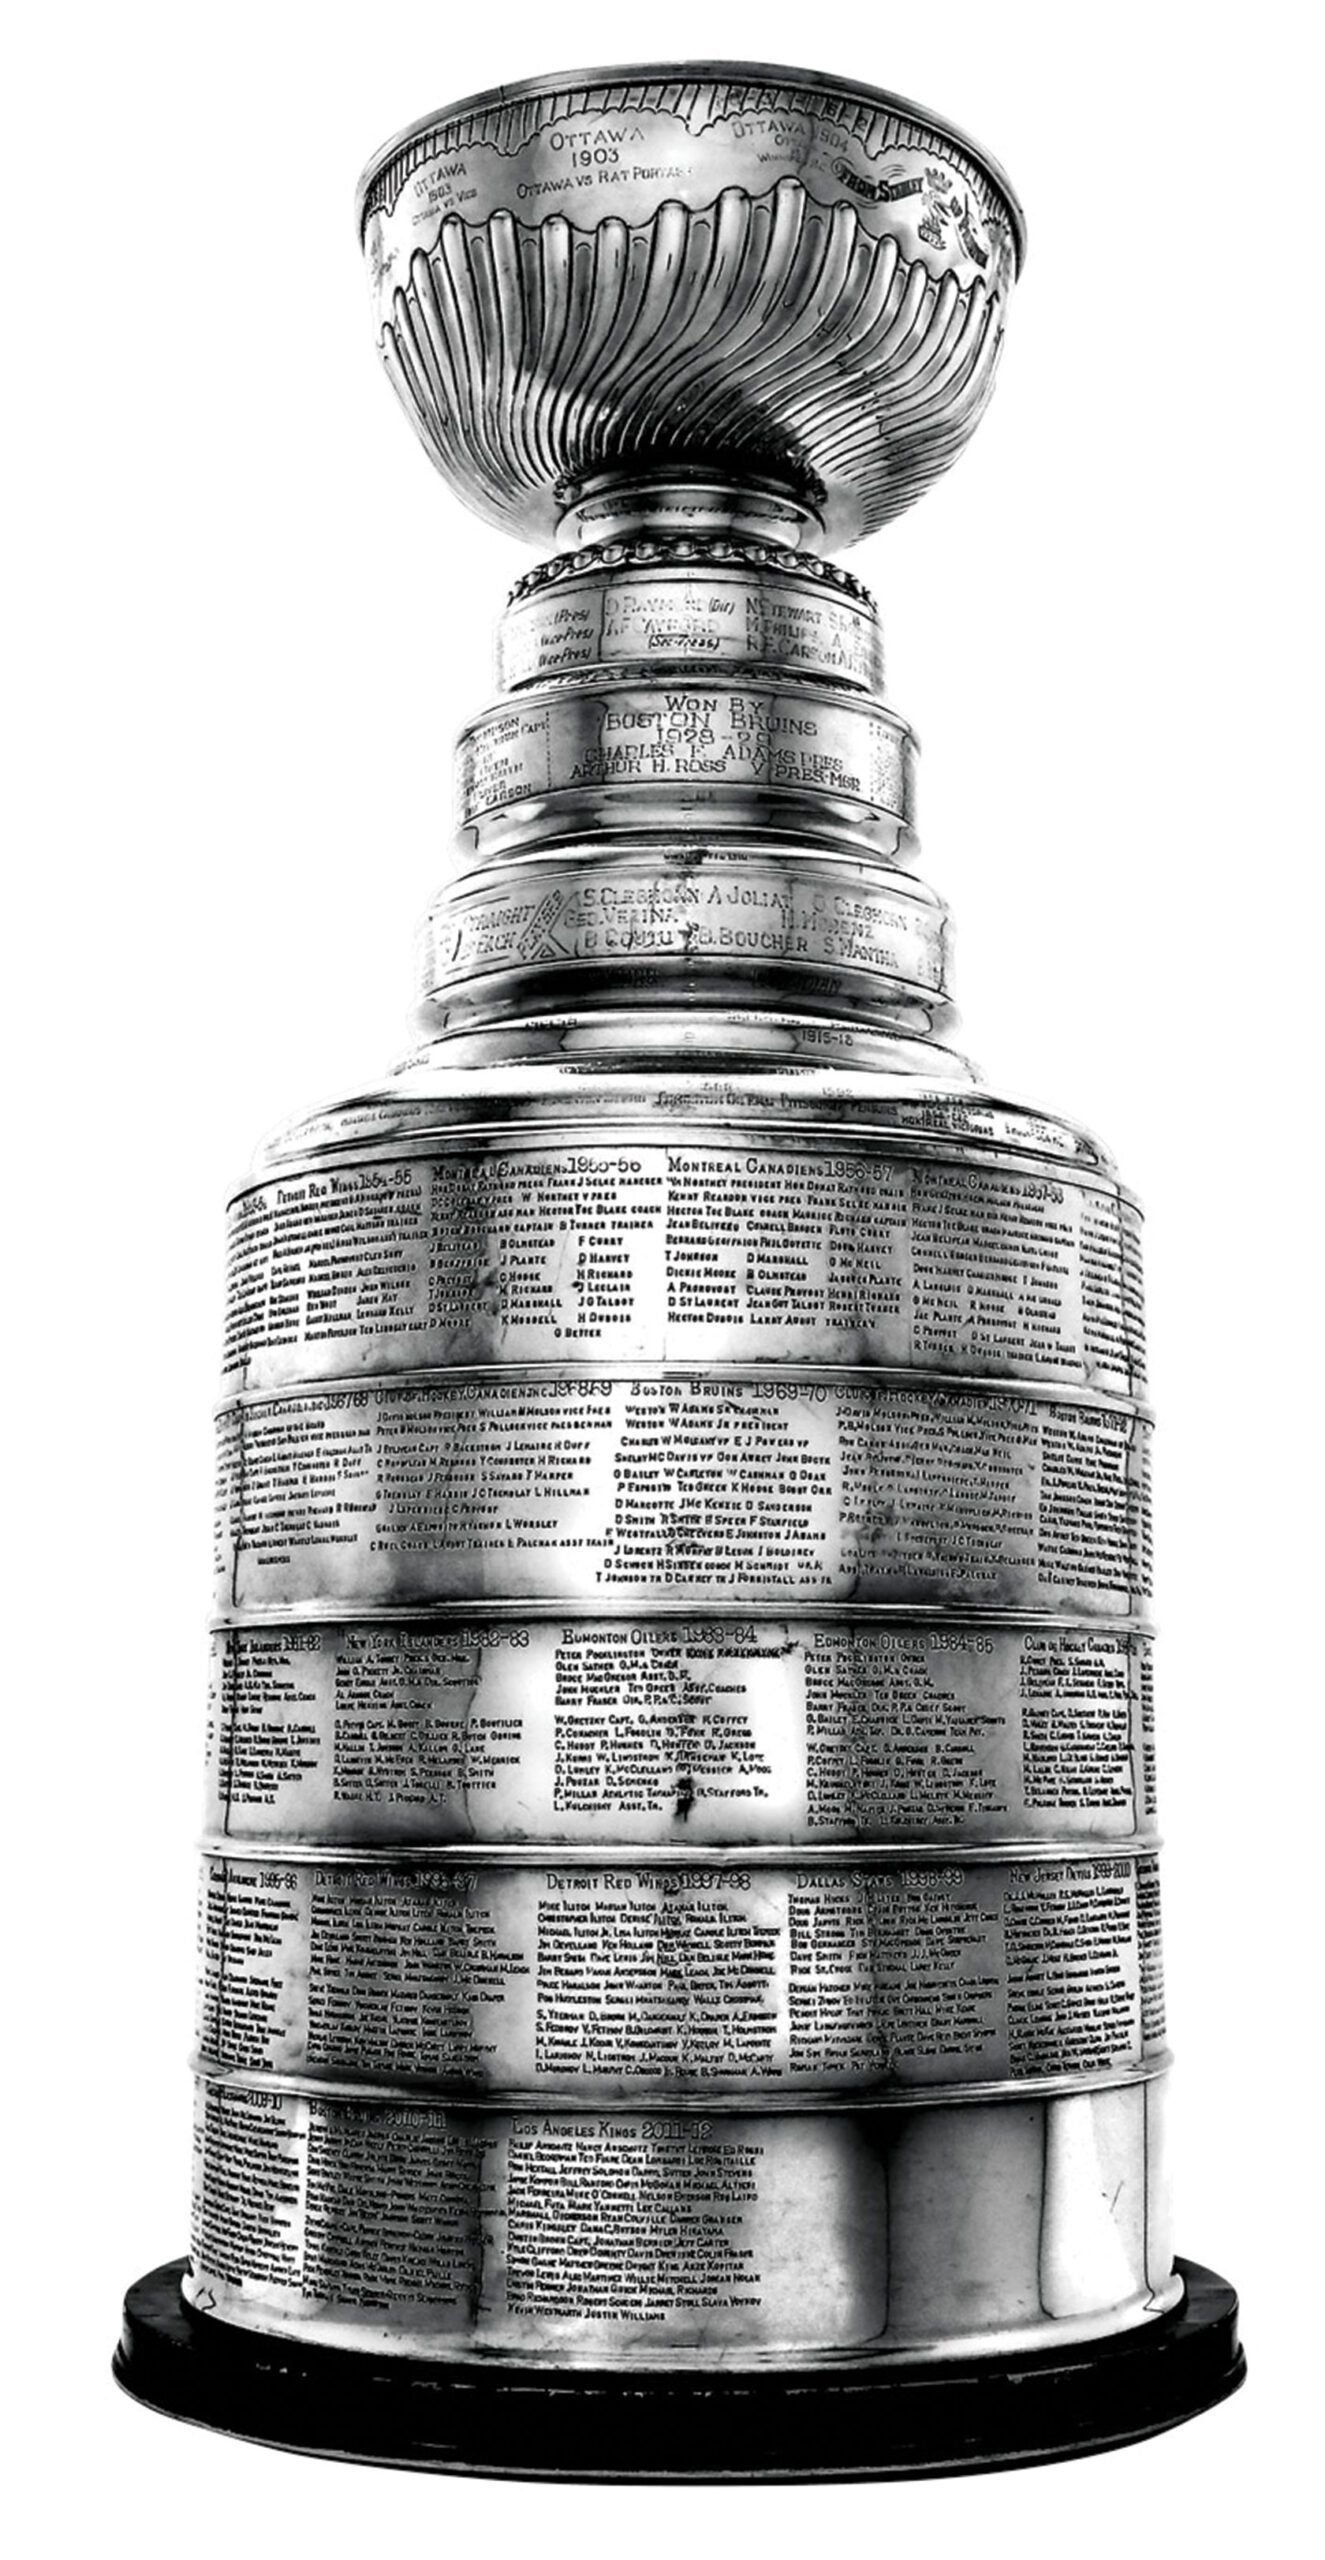 https://www.baystatebanner.com/wp-content/uploads/2023/06/stanleycup_clipped-scaled.jpg